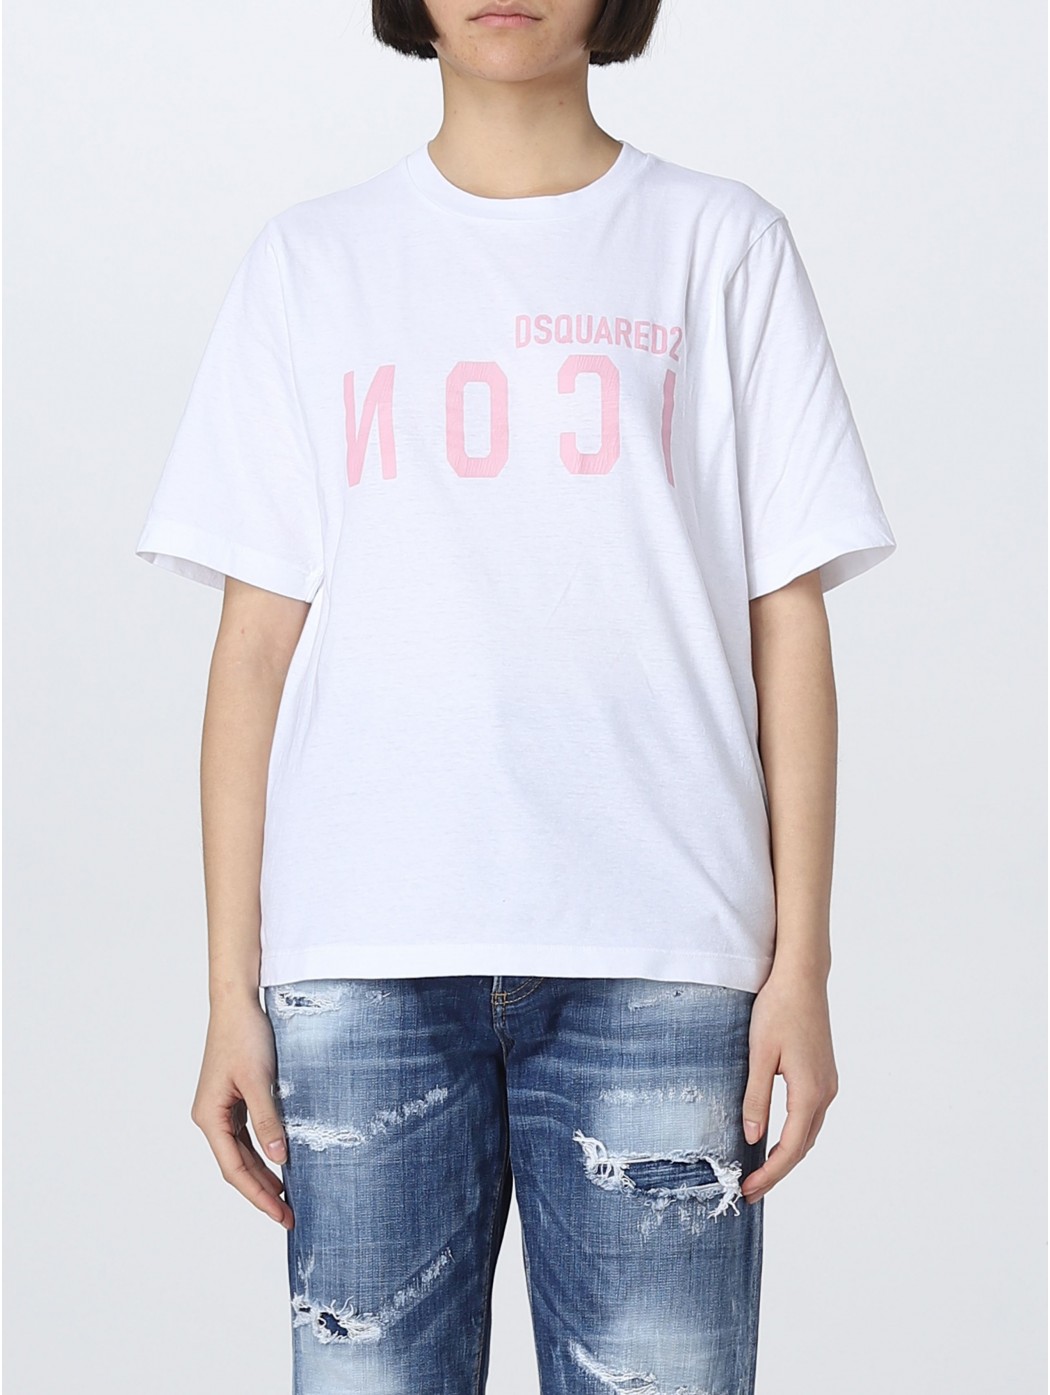 T-SHIRT ICON  DSQUARED2